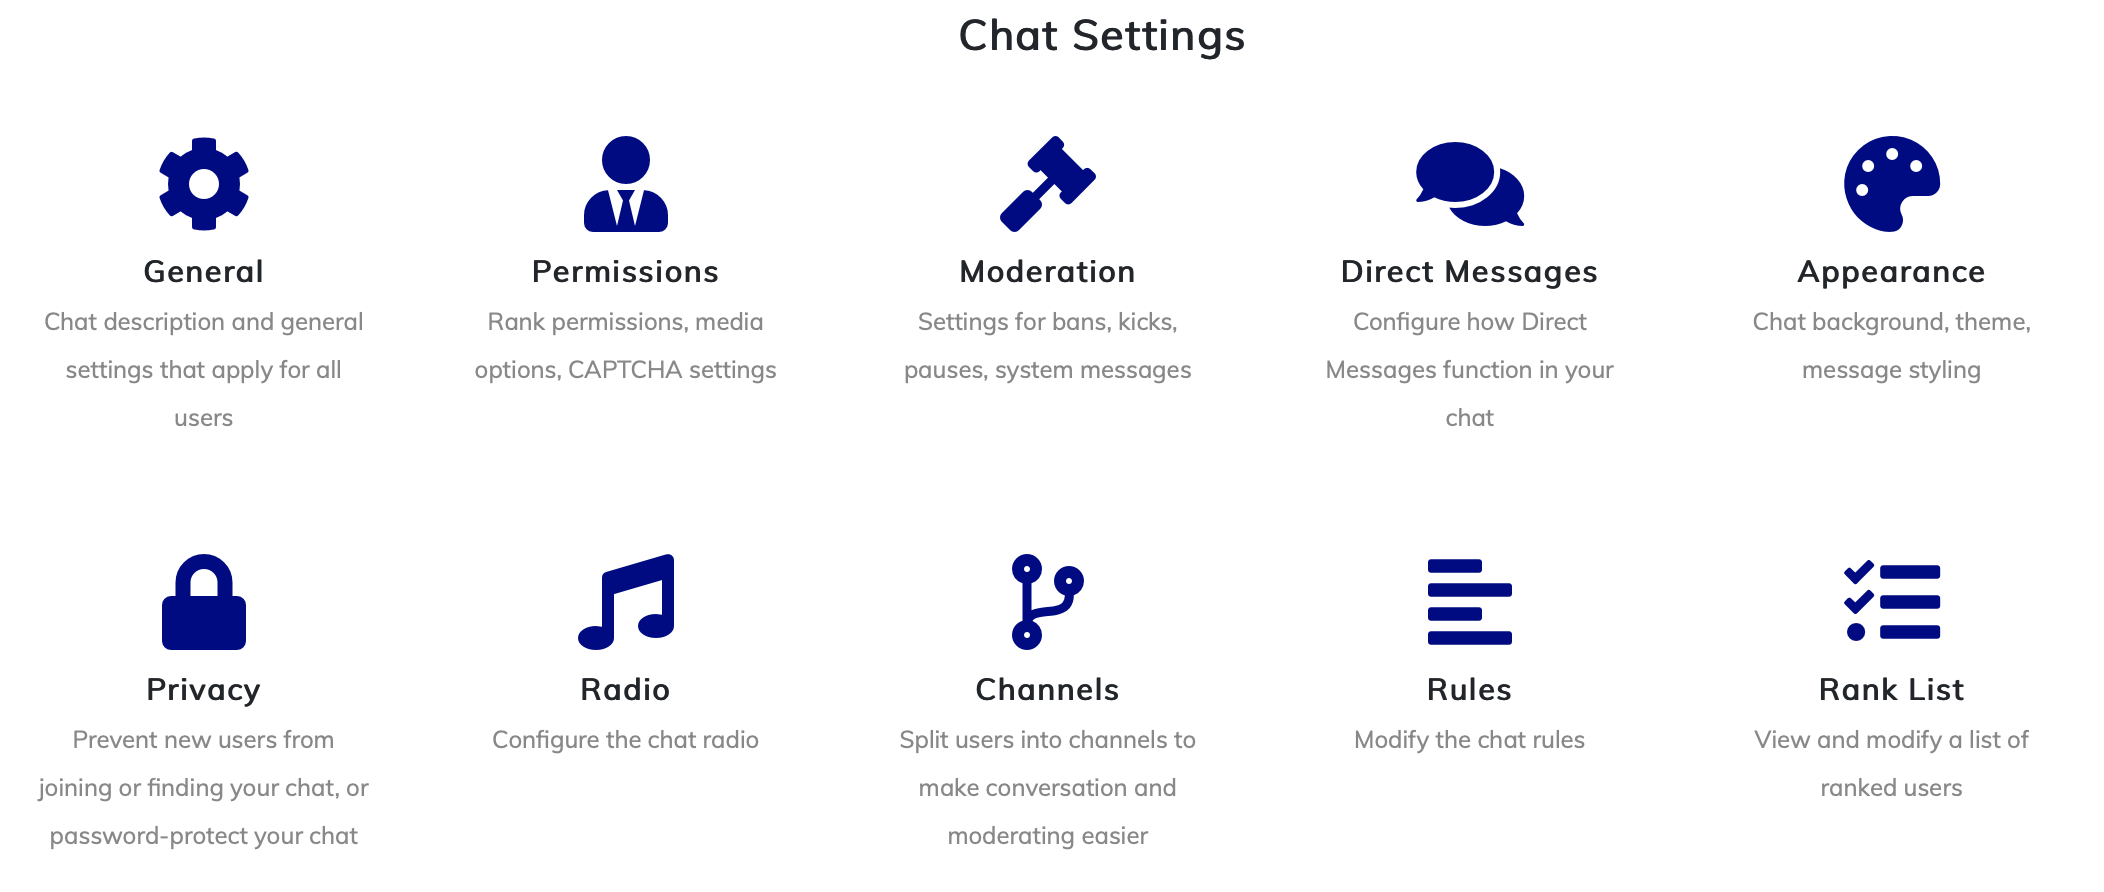 Customize your chatroom with a variety of options, to make everything work exactly how you see fit.